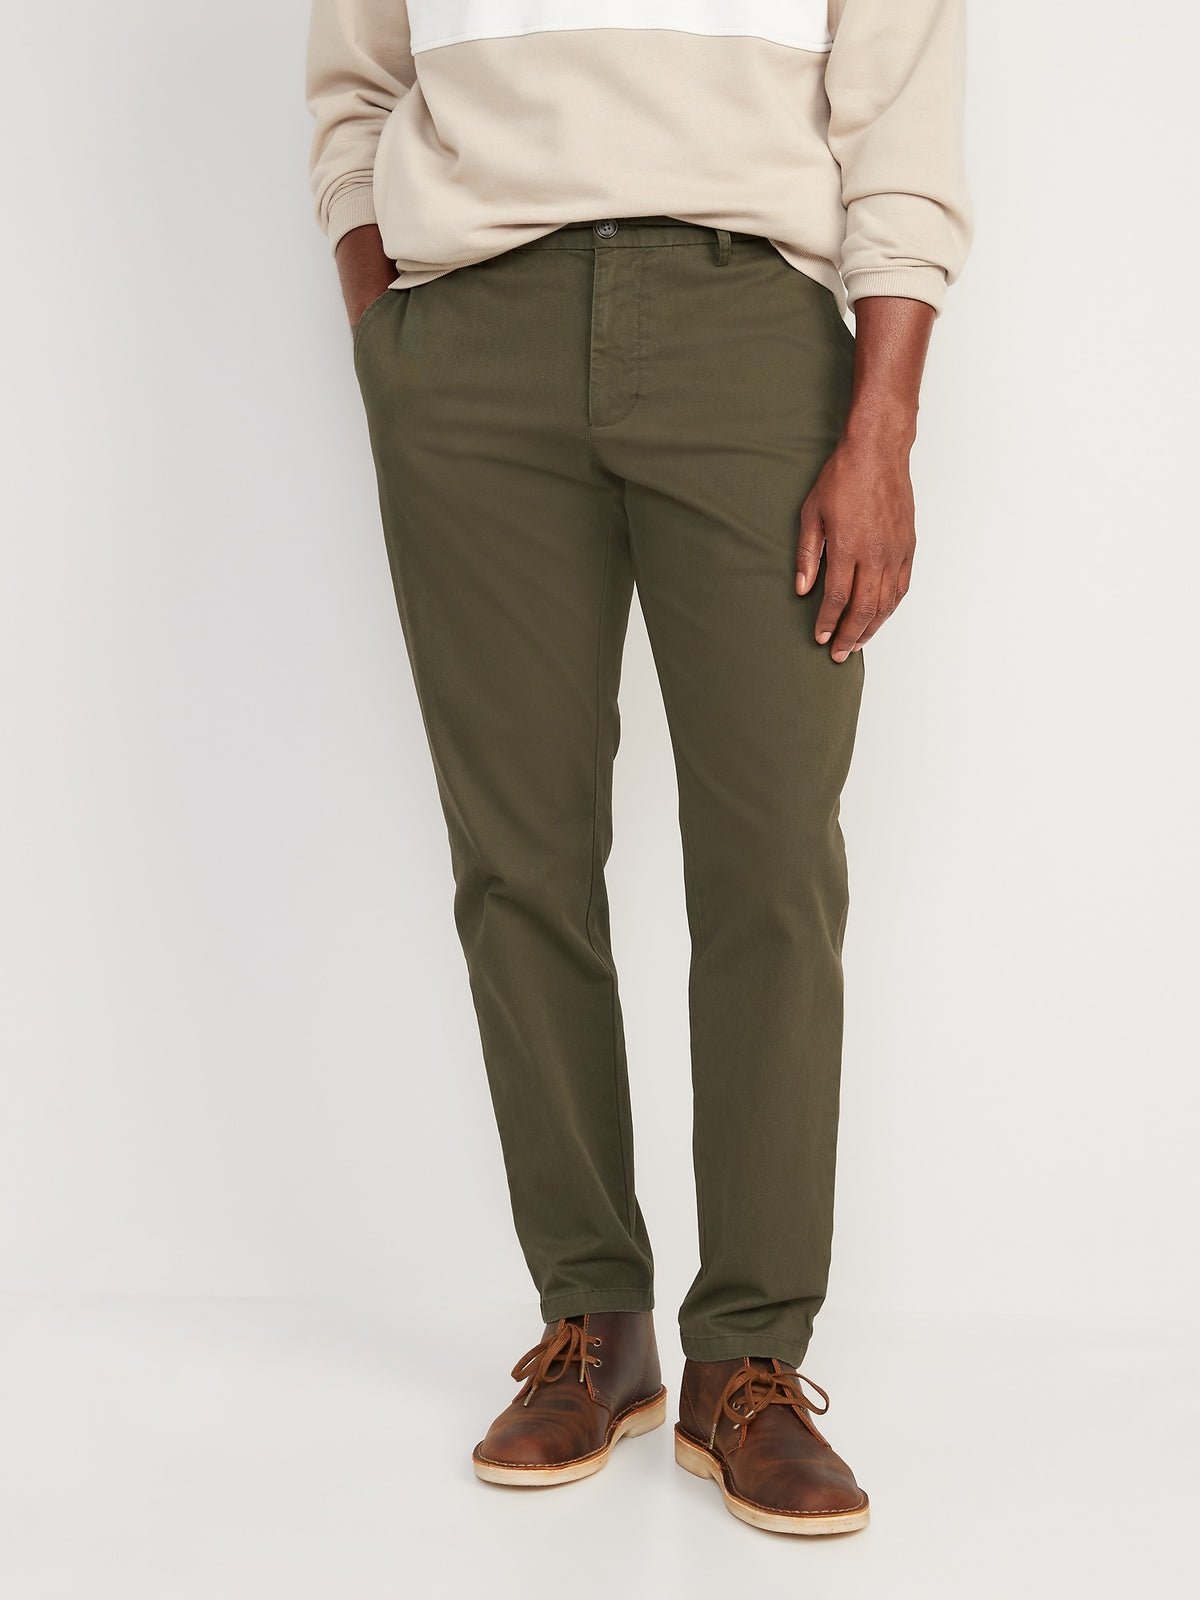 ONLINE EXCLUSIVE_Athletic Built-In Flex Rotation Chino Pants for Men_HeritageGreen_2450.jpeg